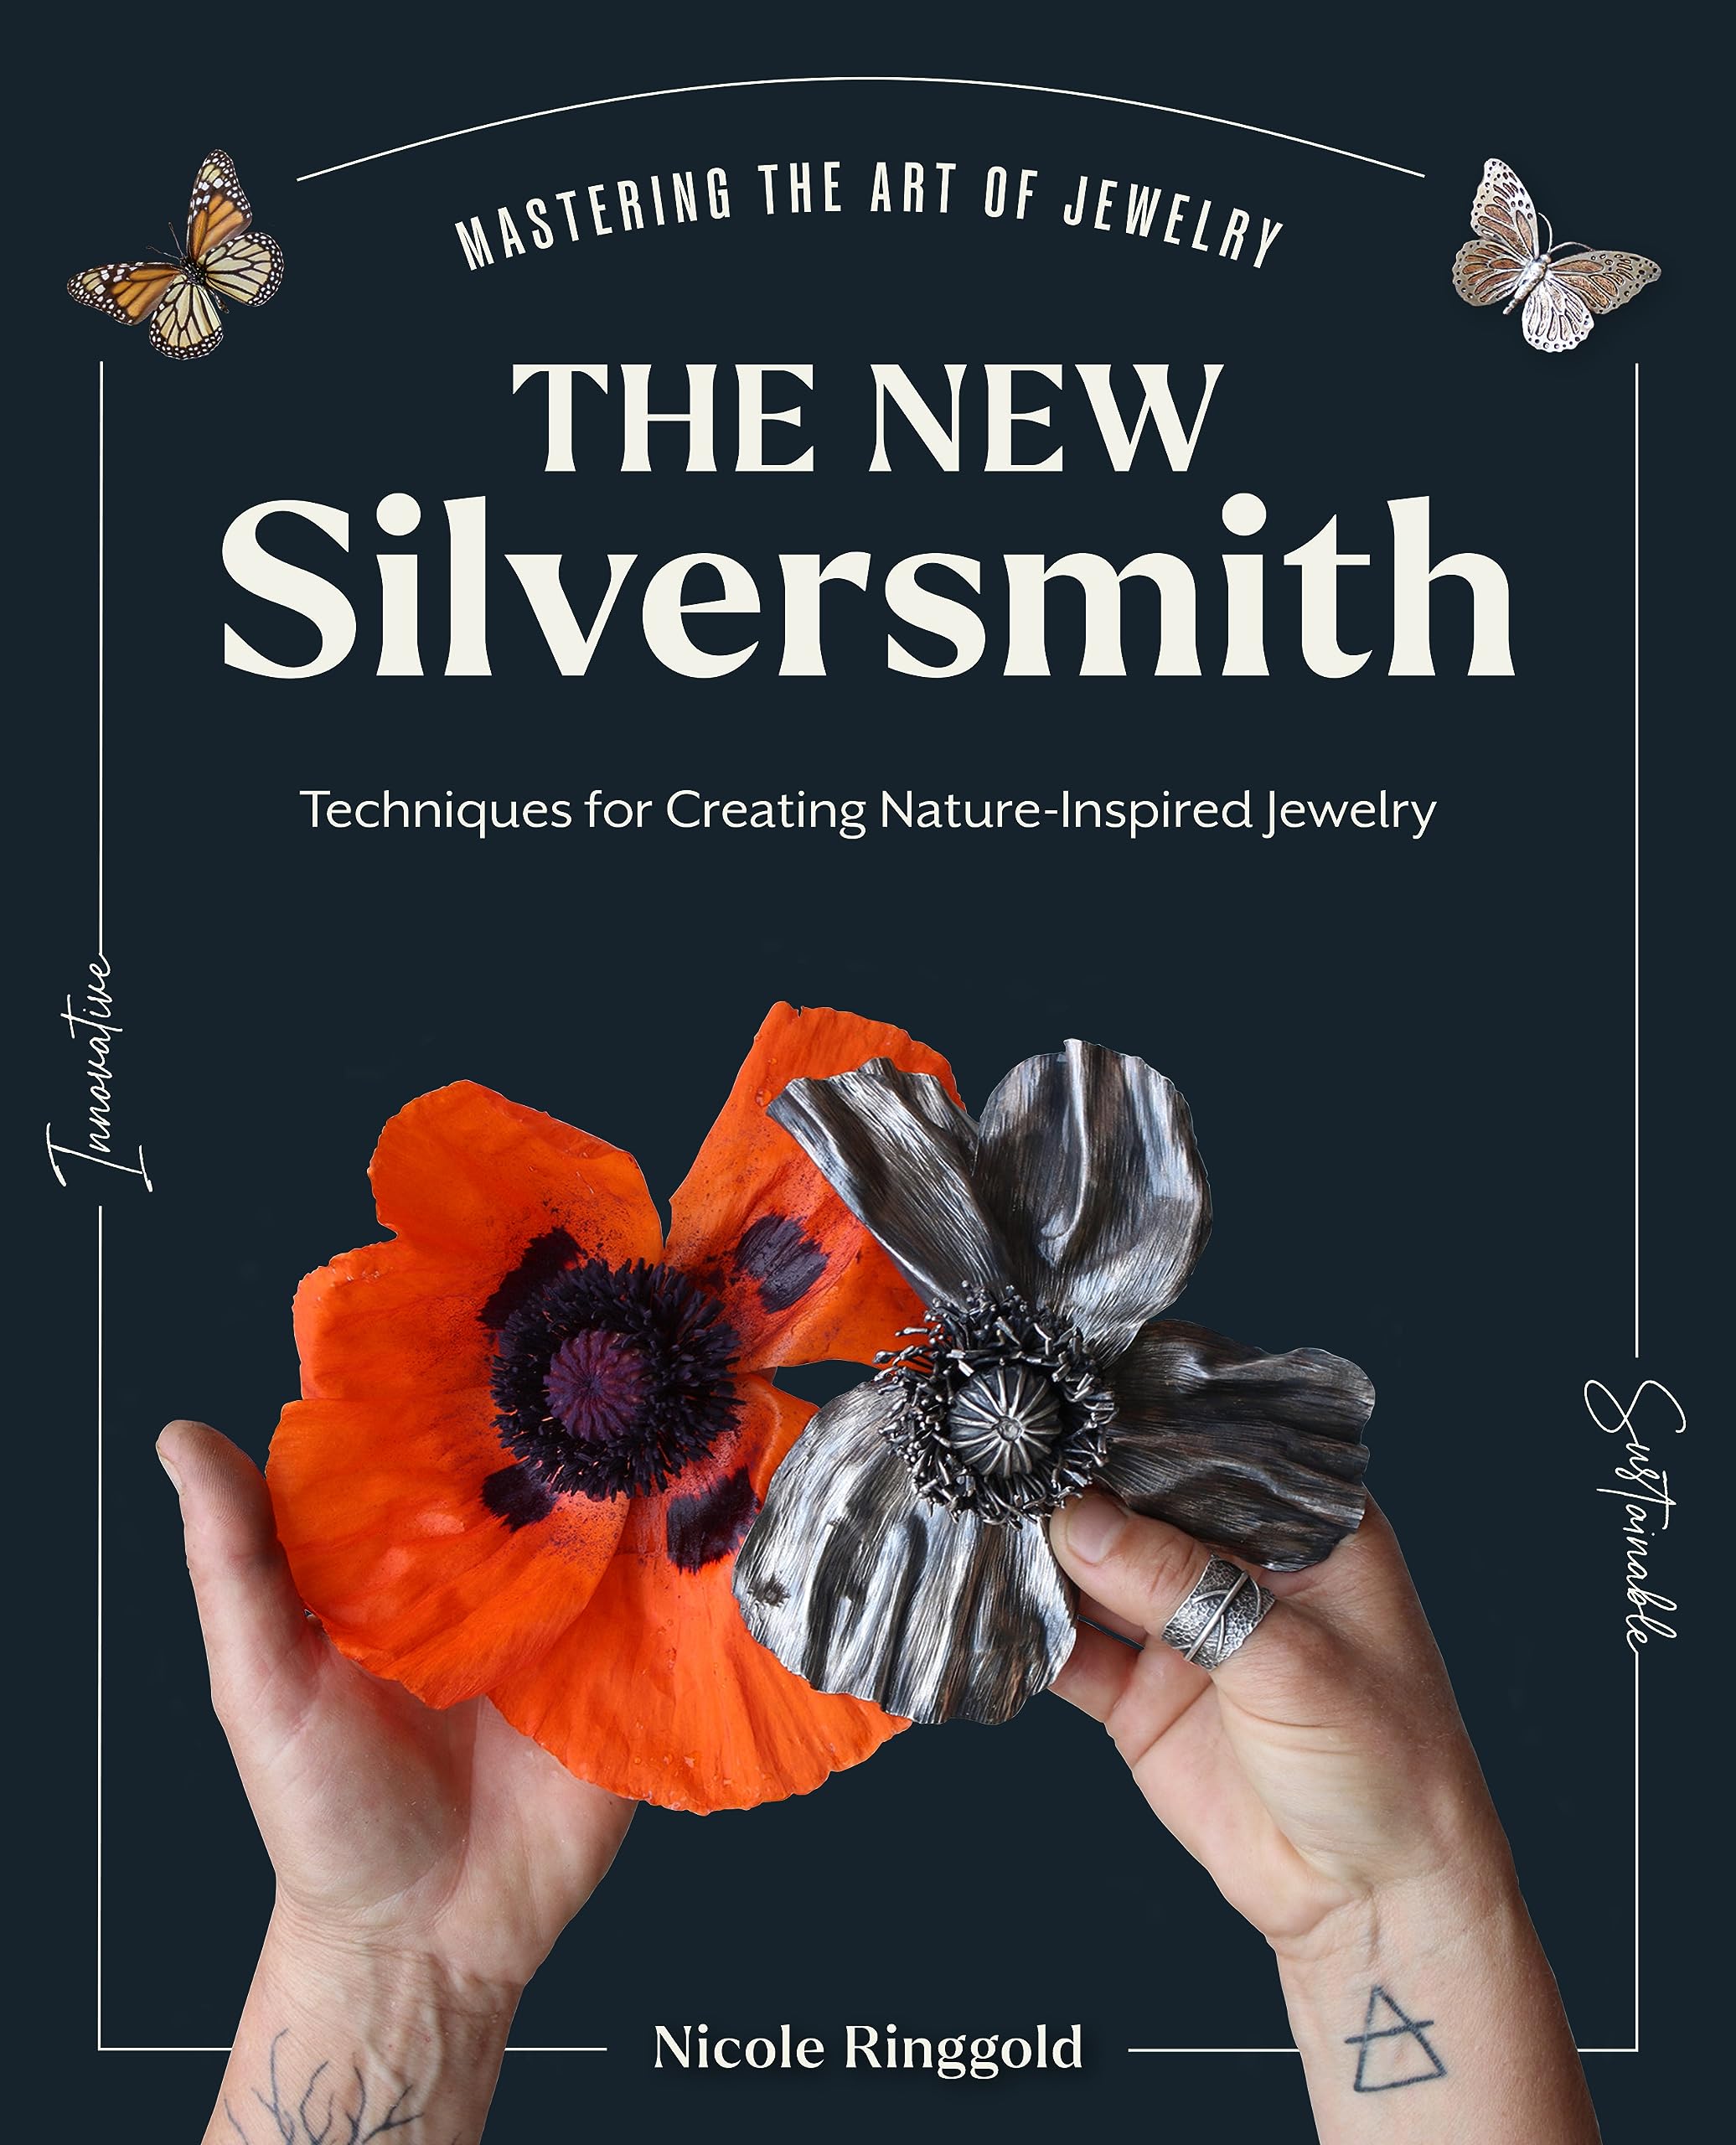 The New Silversmith: Innovative, Sustainable Techniques for Creating Nature-Inspired Jewelry by Ringgold, Nicole